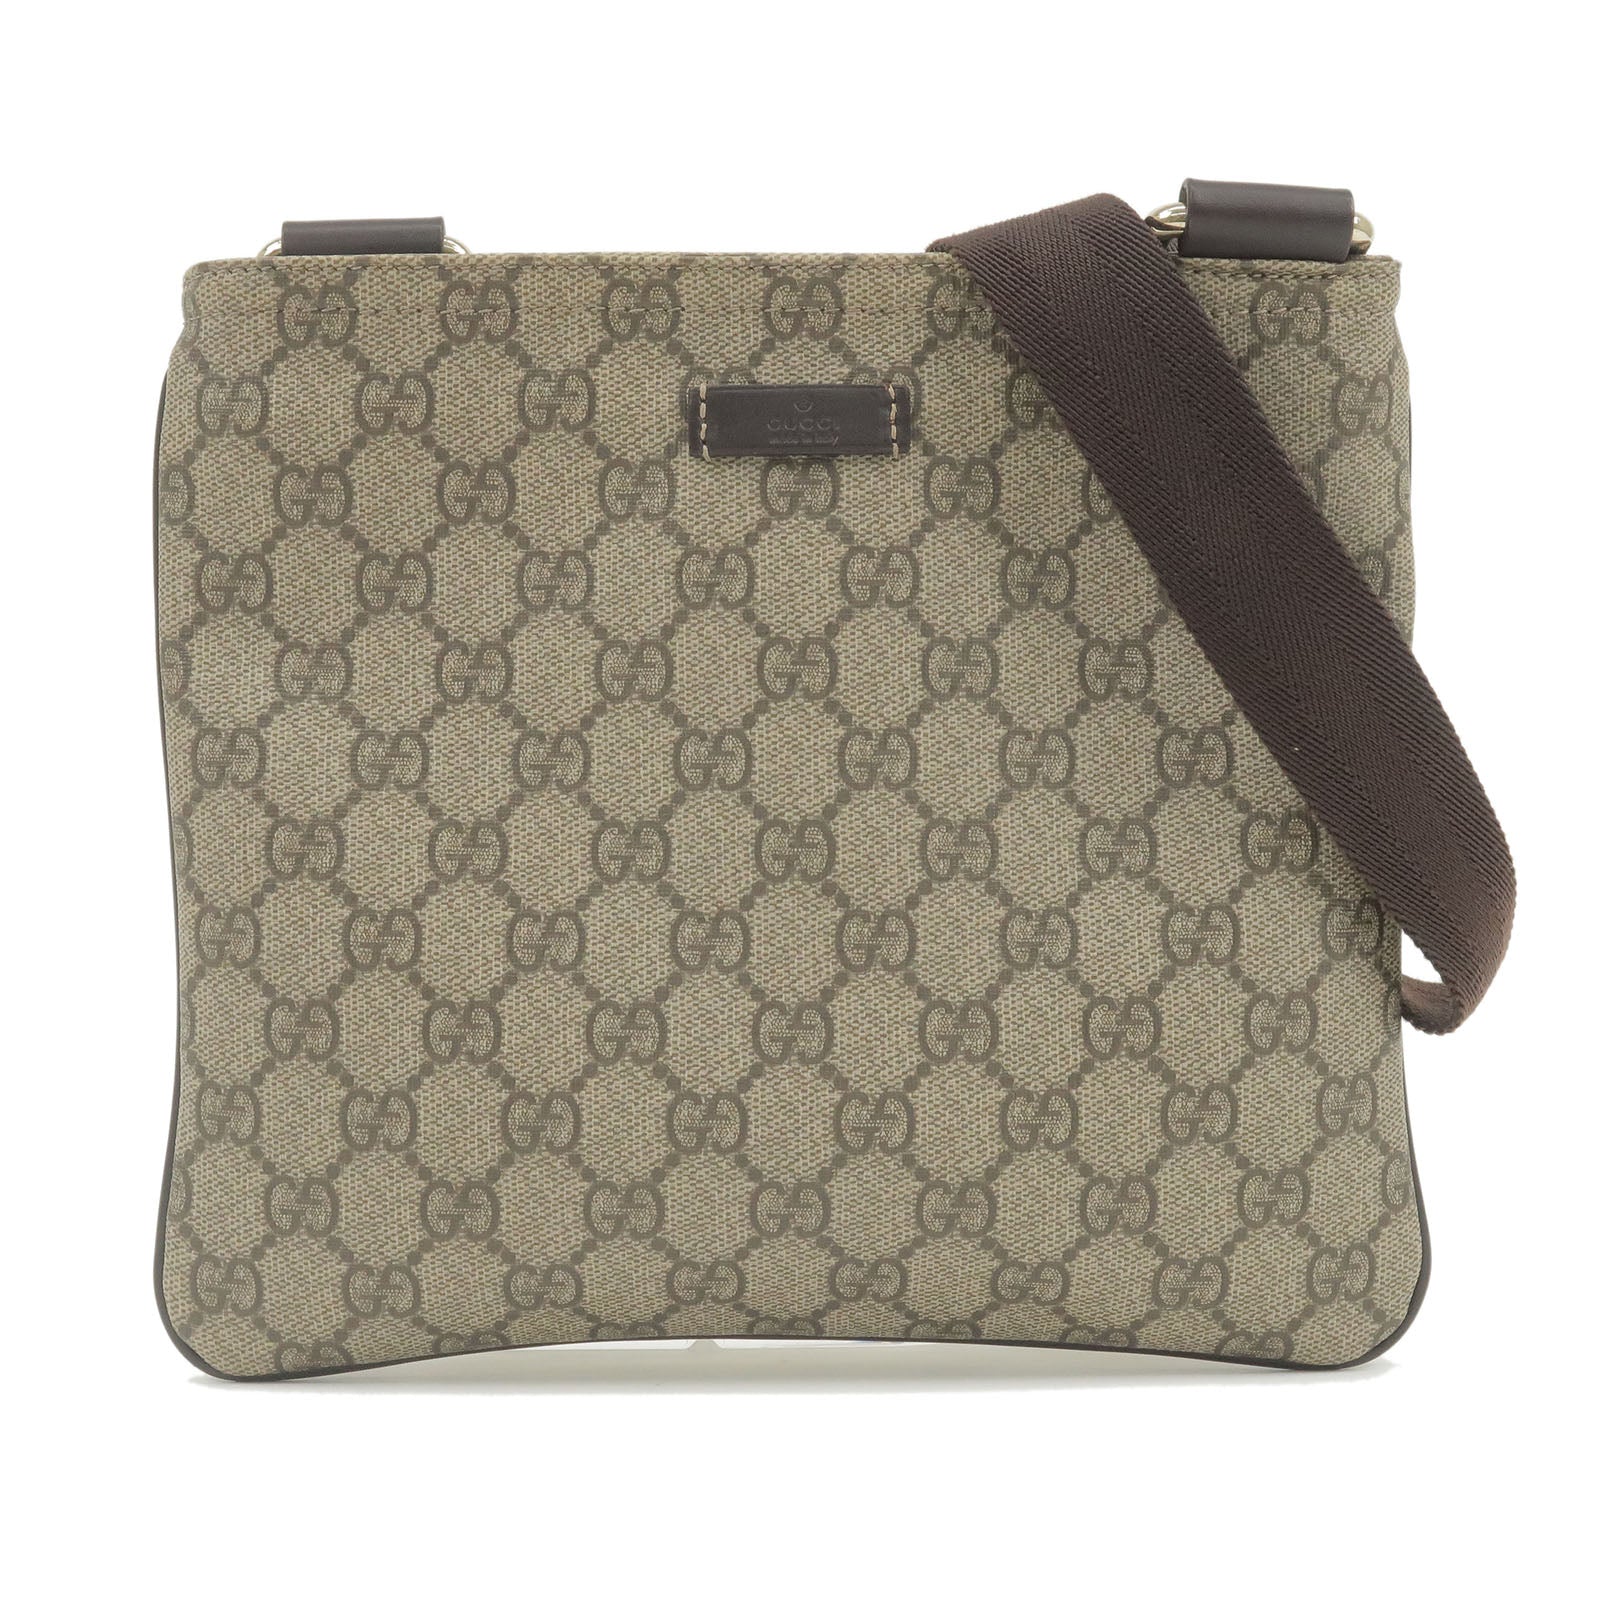 GUCCI-GG-Plus-Leather-Shoulder-Bag-Pouch-Beige-Brown-201538 – dct